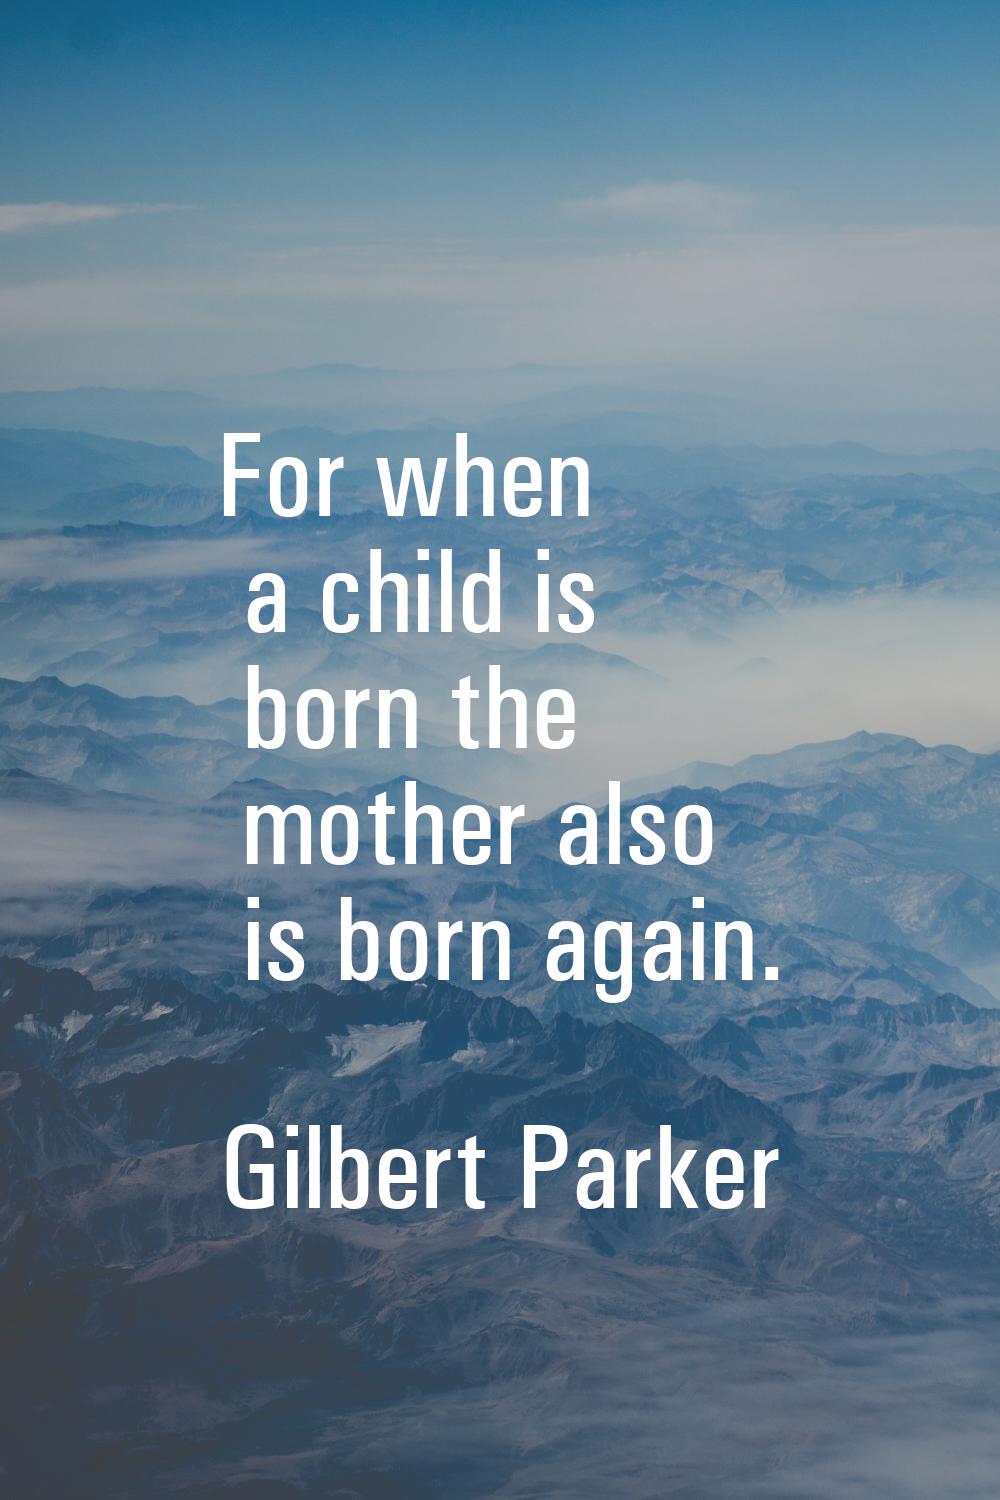 For when a child is born the mother also is born again.